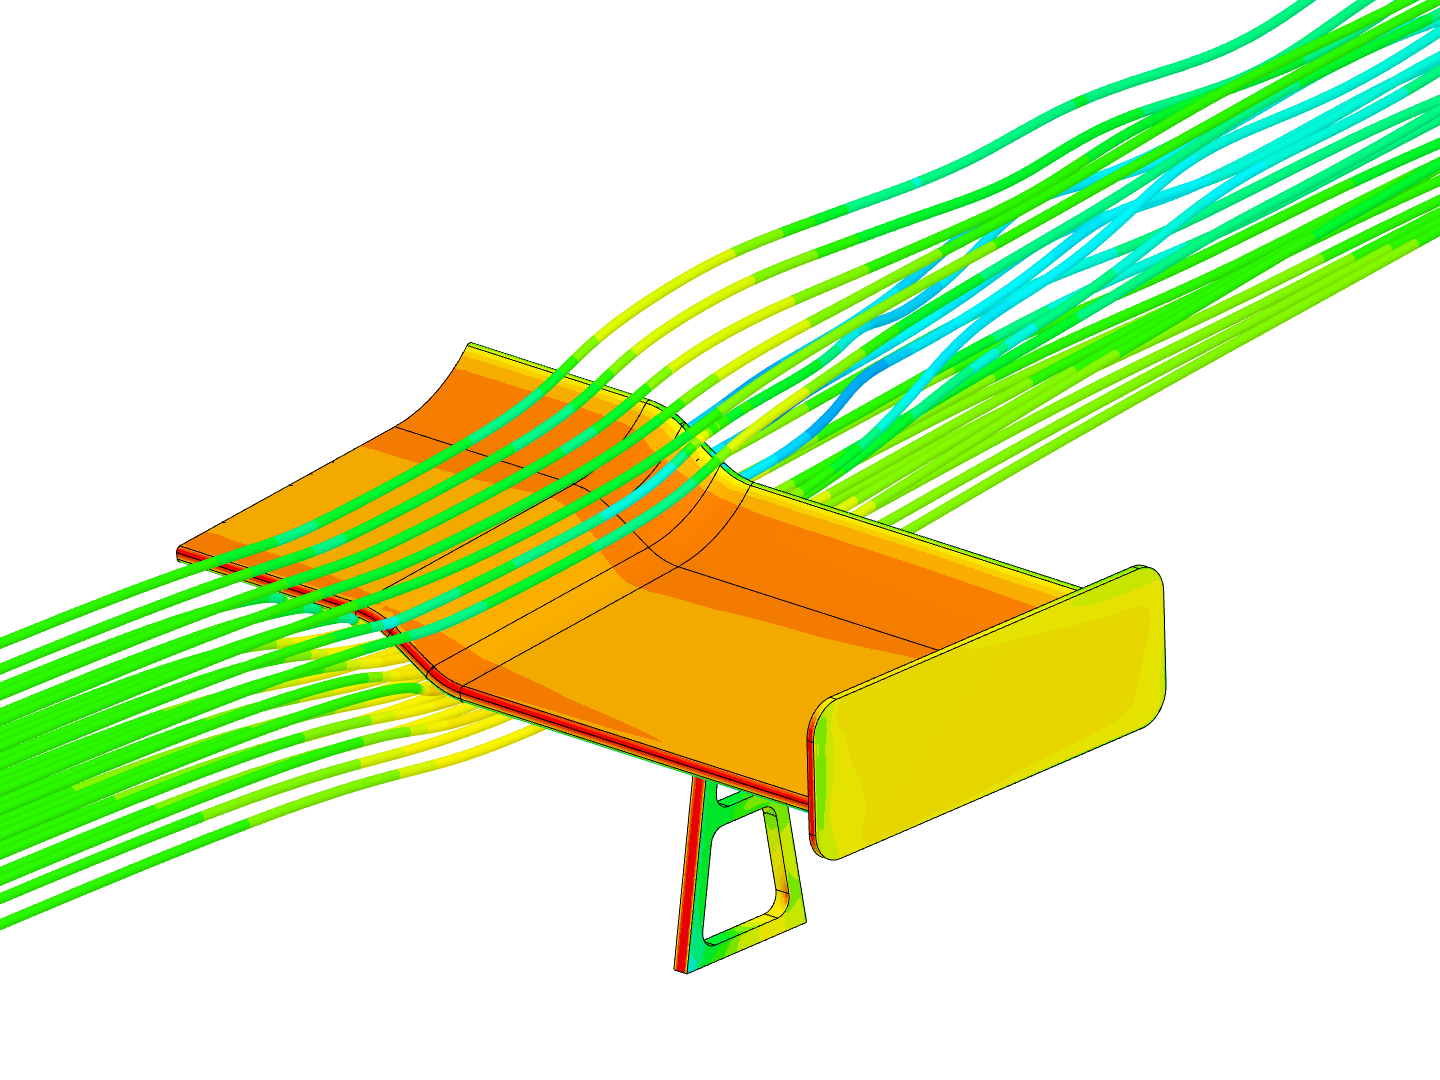 Airflow on GT Spoiler - Study image